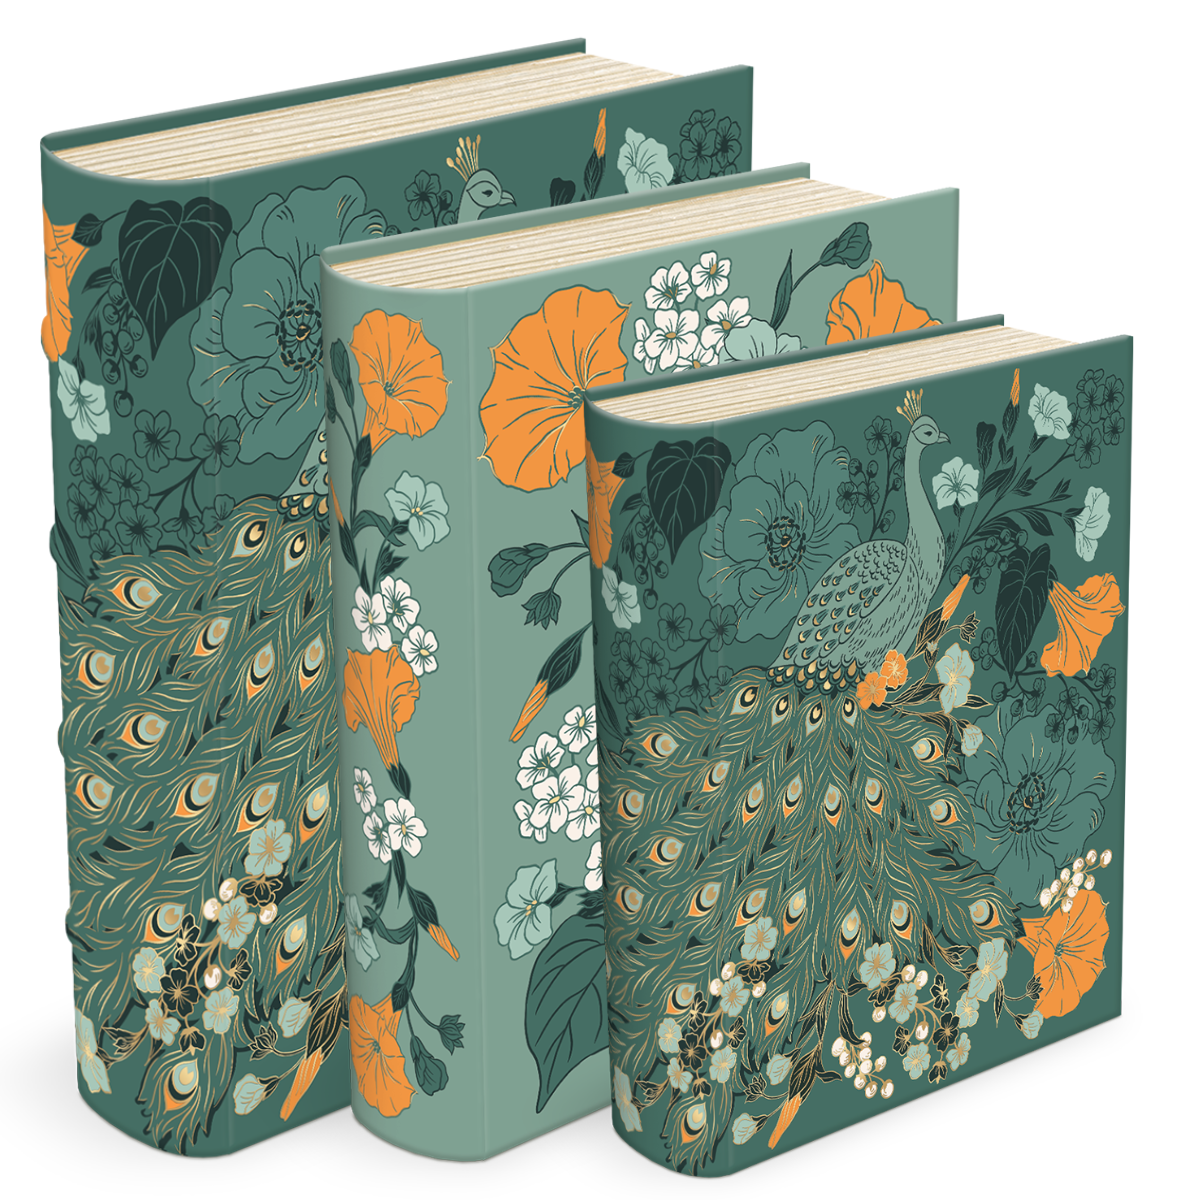 Nightshade Peacock Floral Book Box Set Product